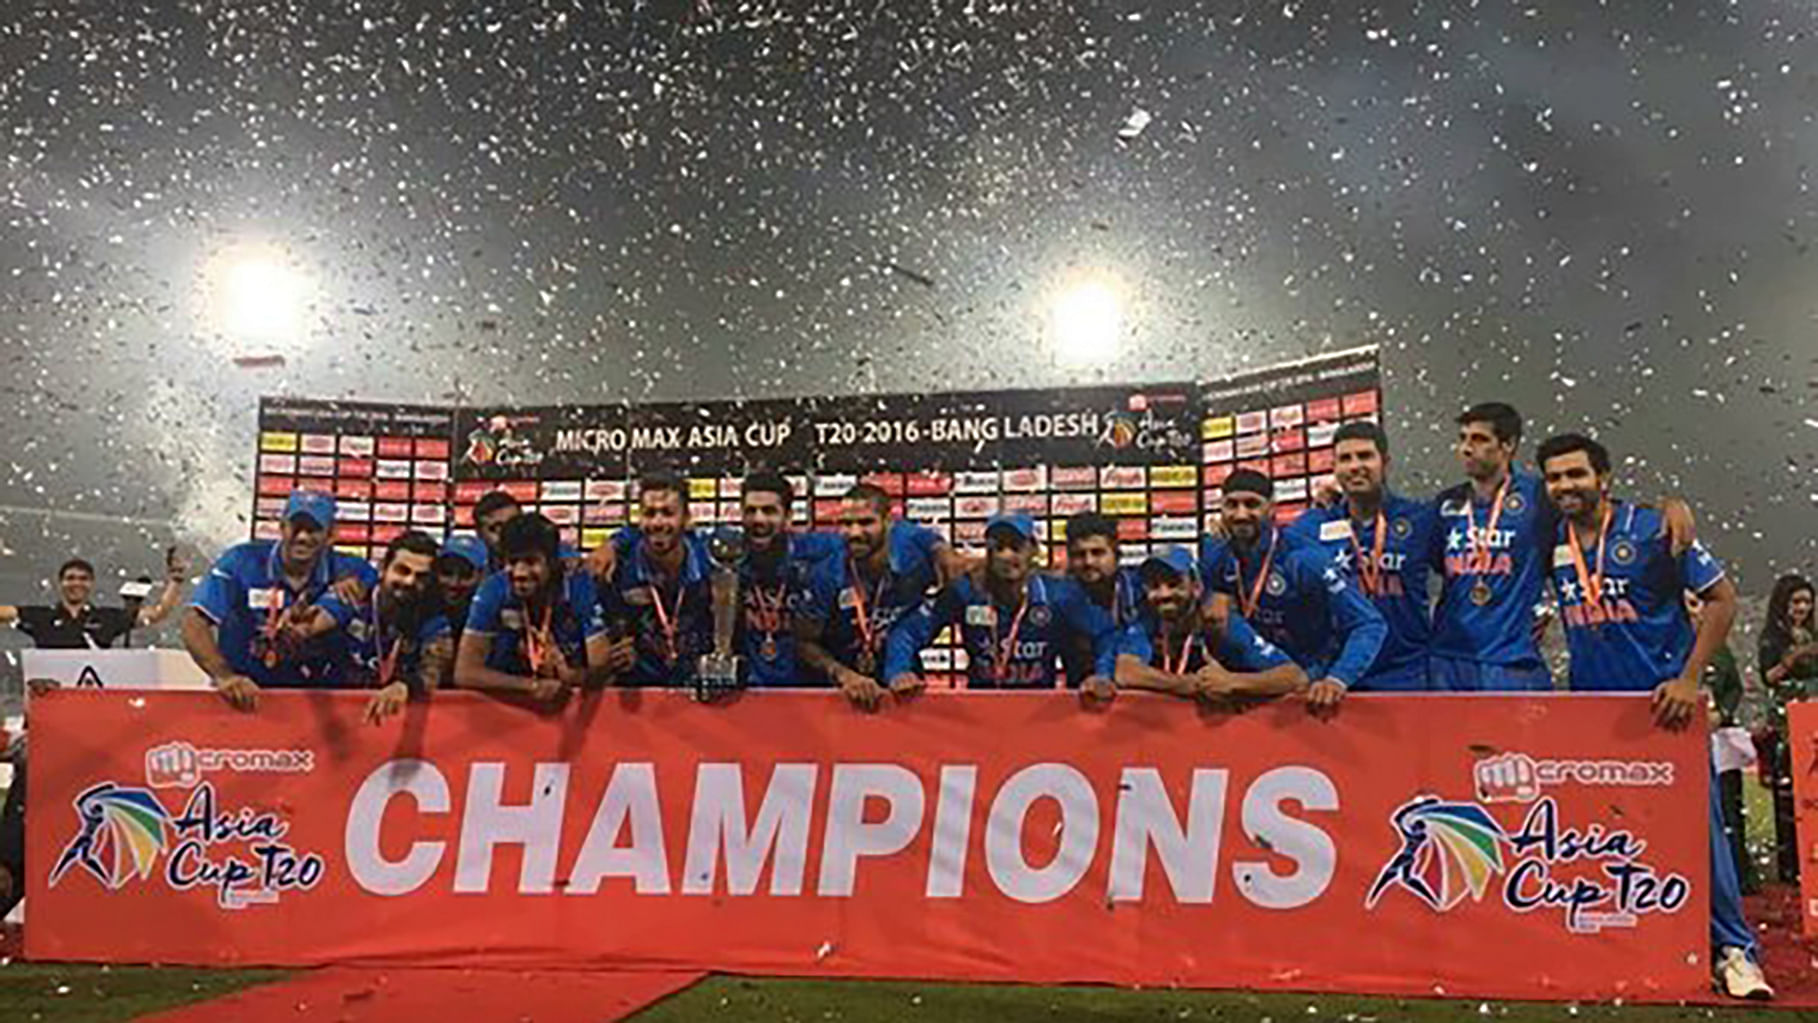 The champs of the Asia Cup: Team India. (Photo: <a href="https://twitter.com/agrawal_shreya/status/706563728439808000">Twitter</a>)